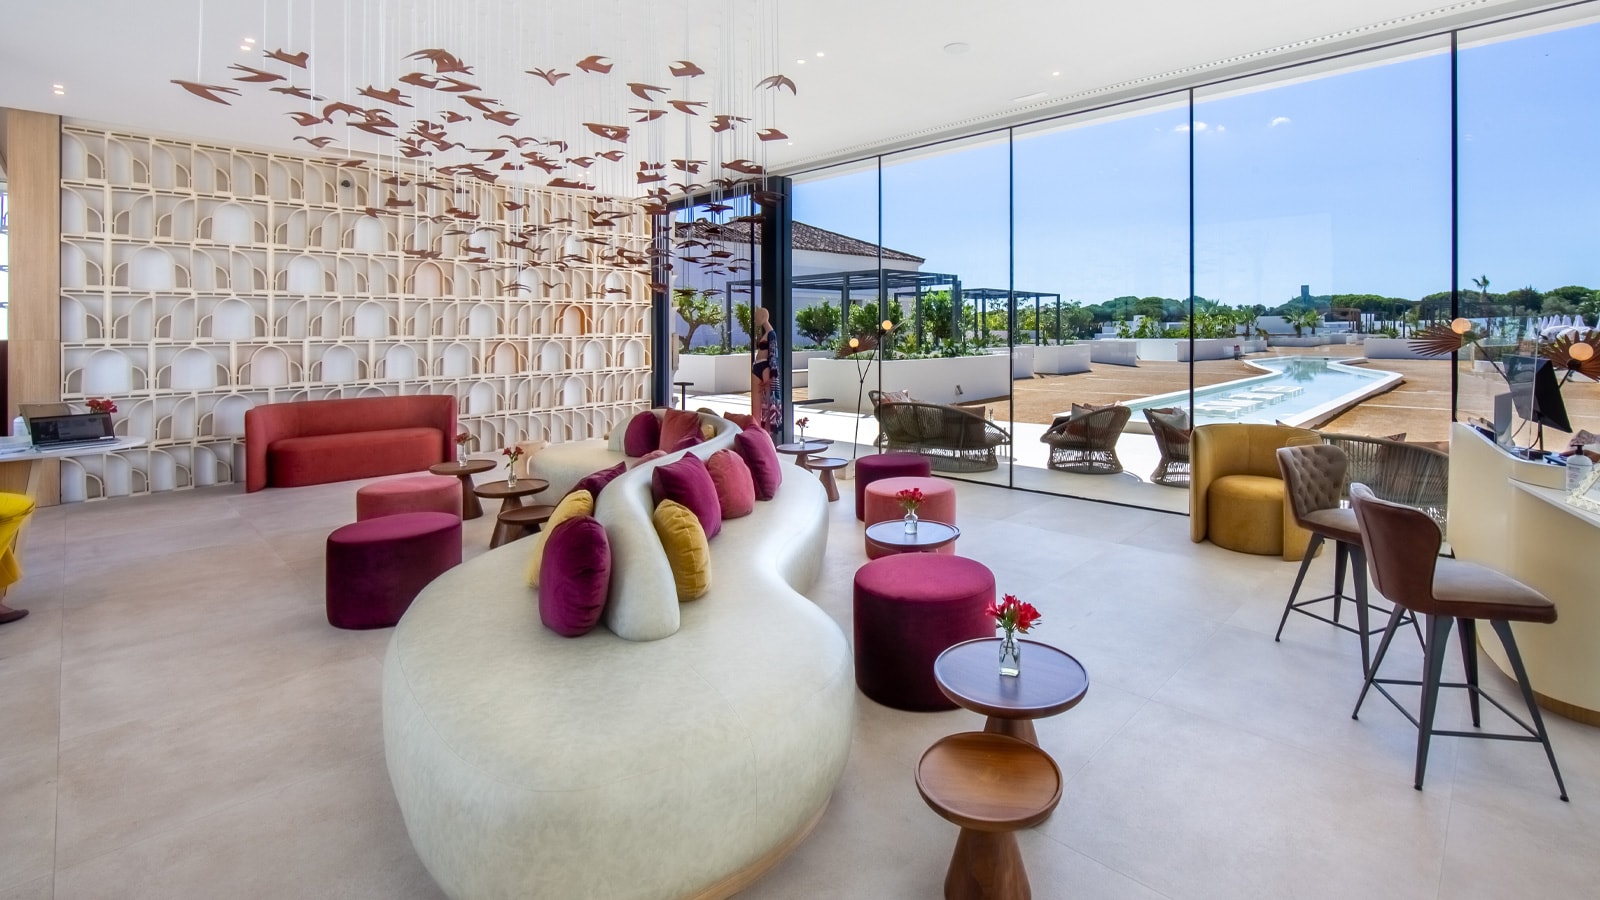 Design and wellness at the luxurious SO/Sotogrande resort